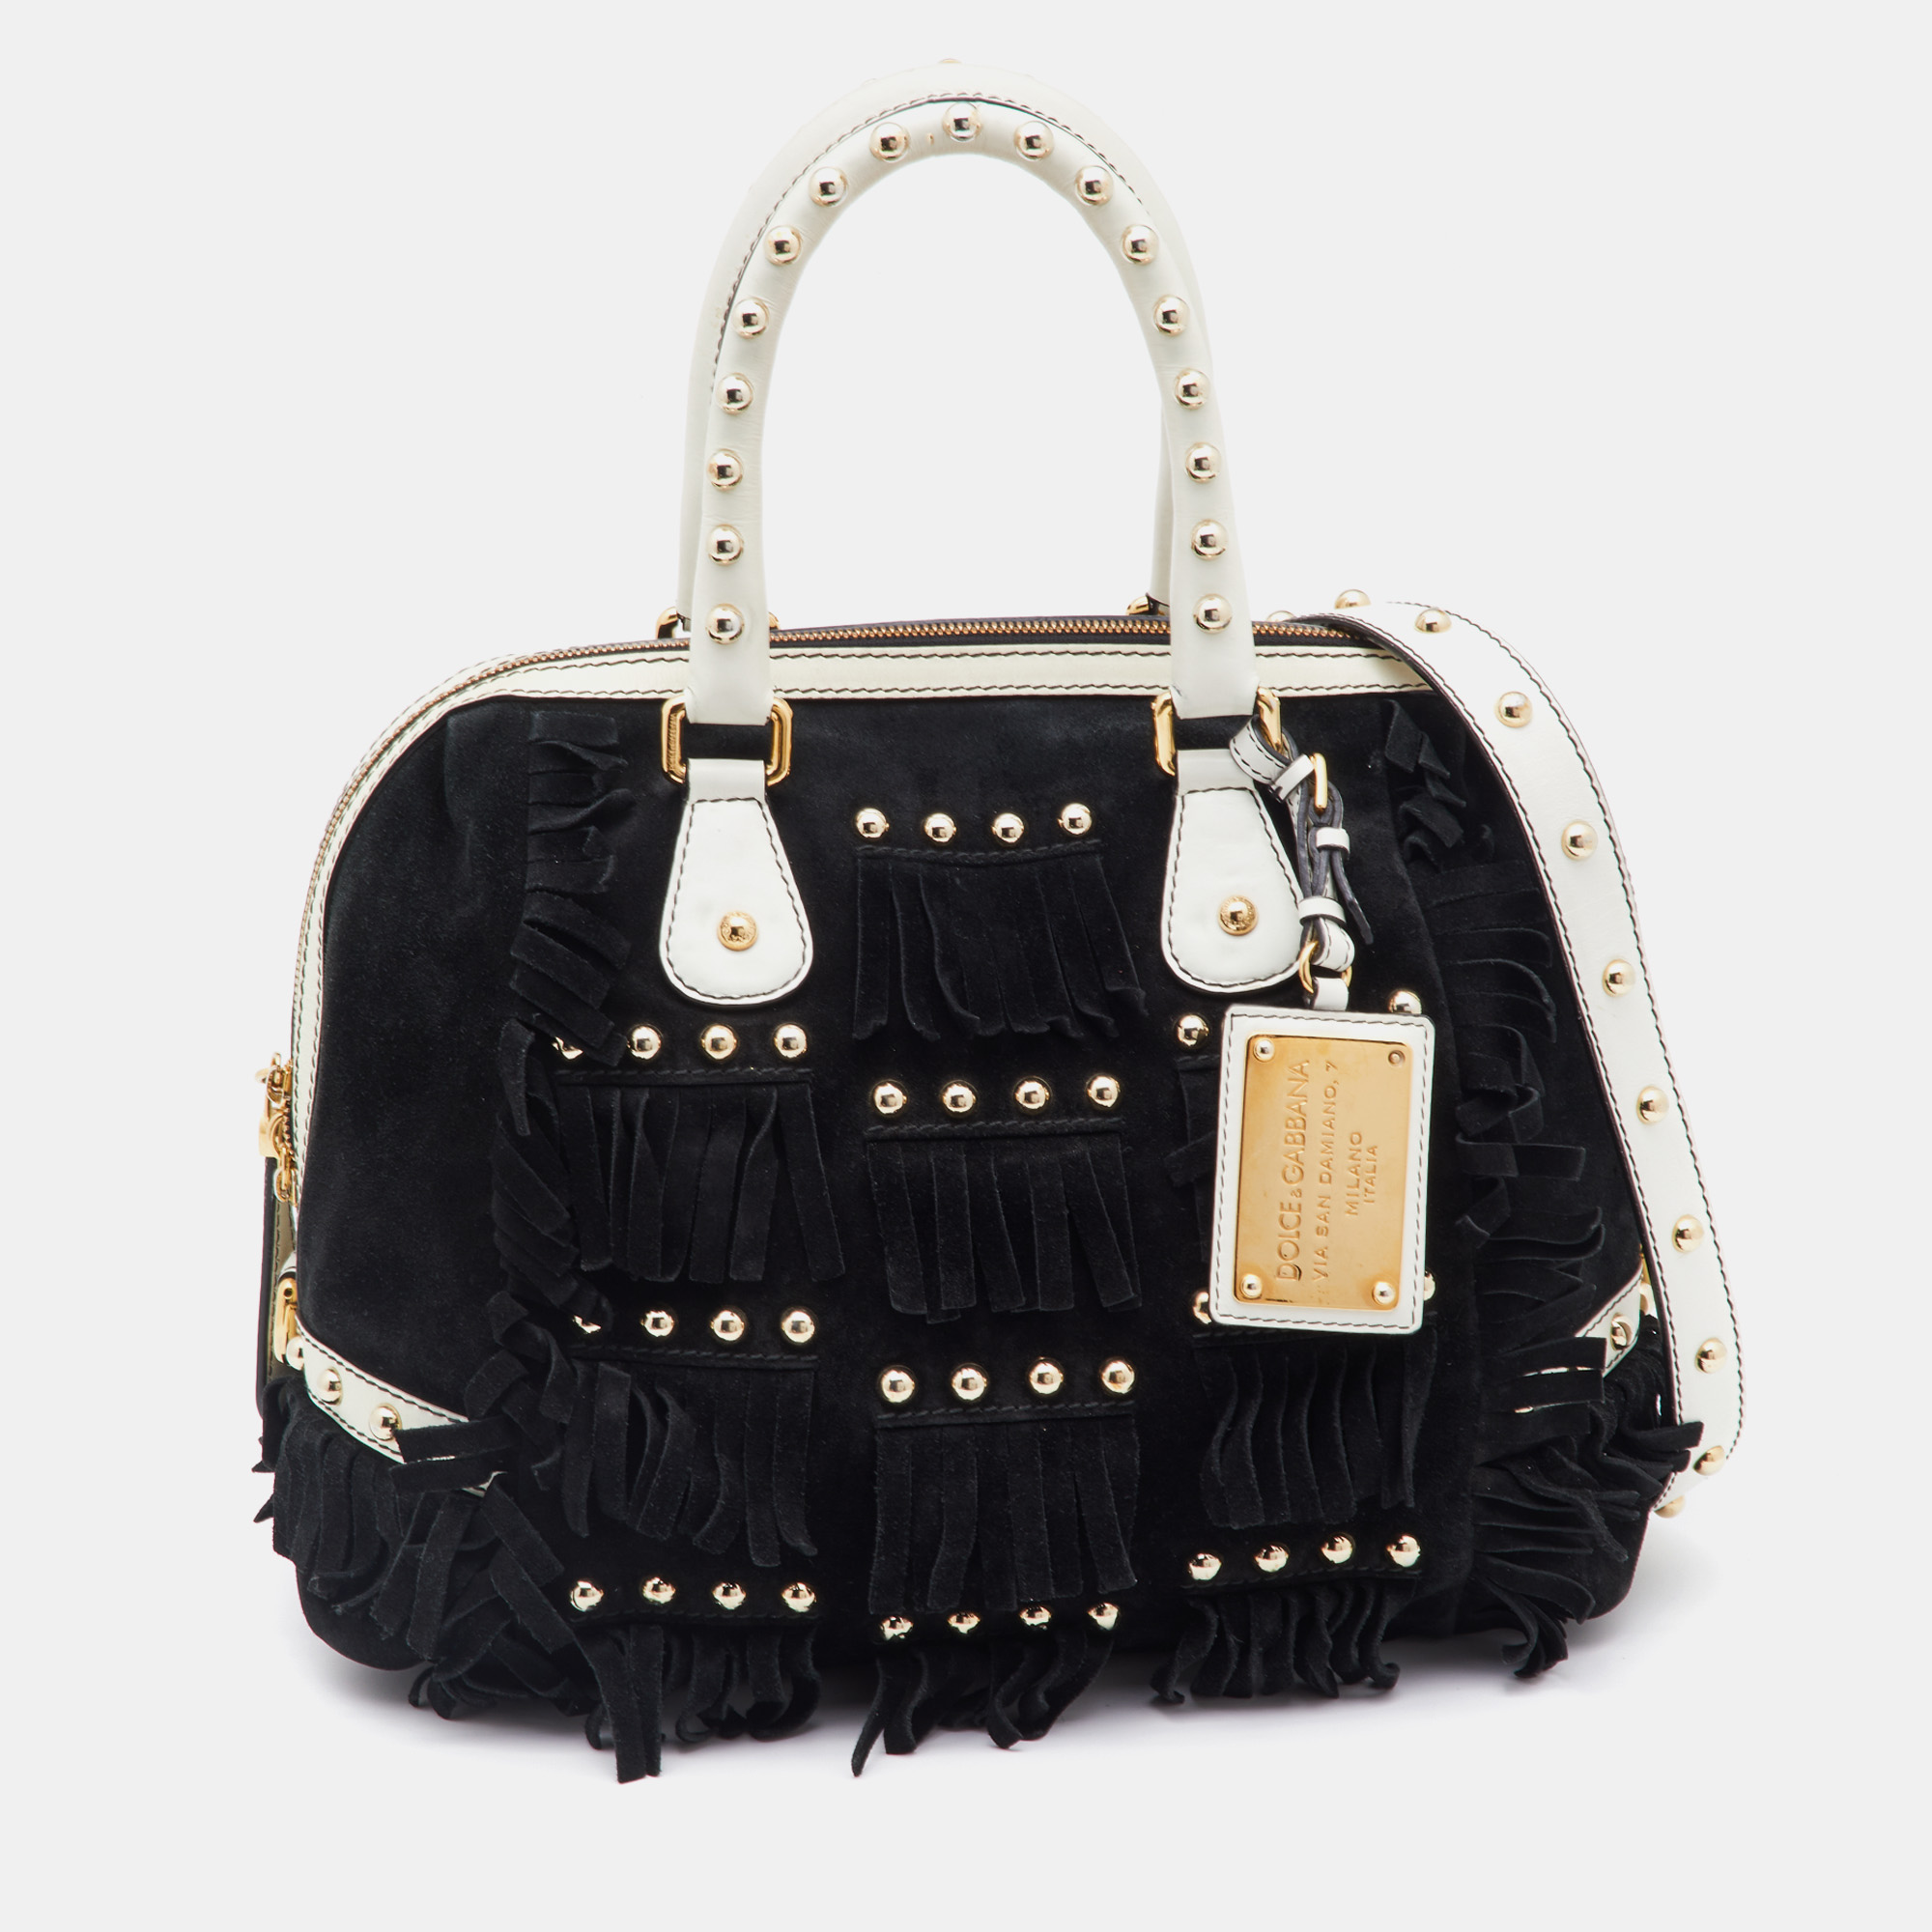 

Dolce & Gabbana Black Suede and Leather Fringed Satchel